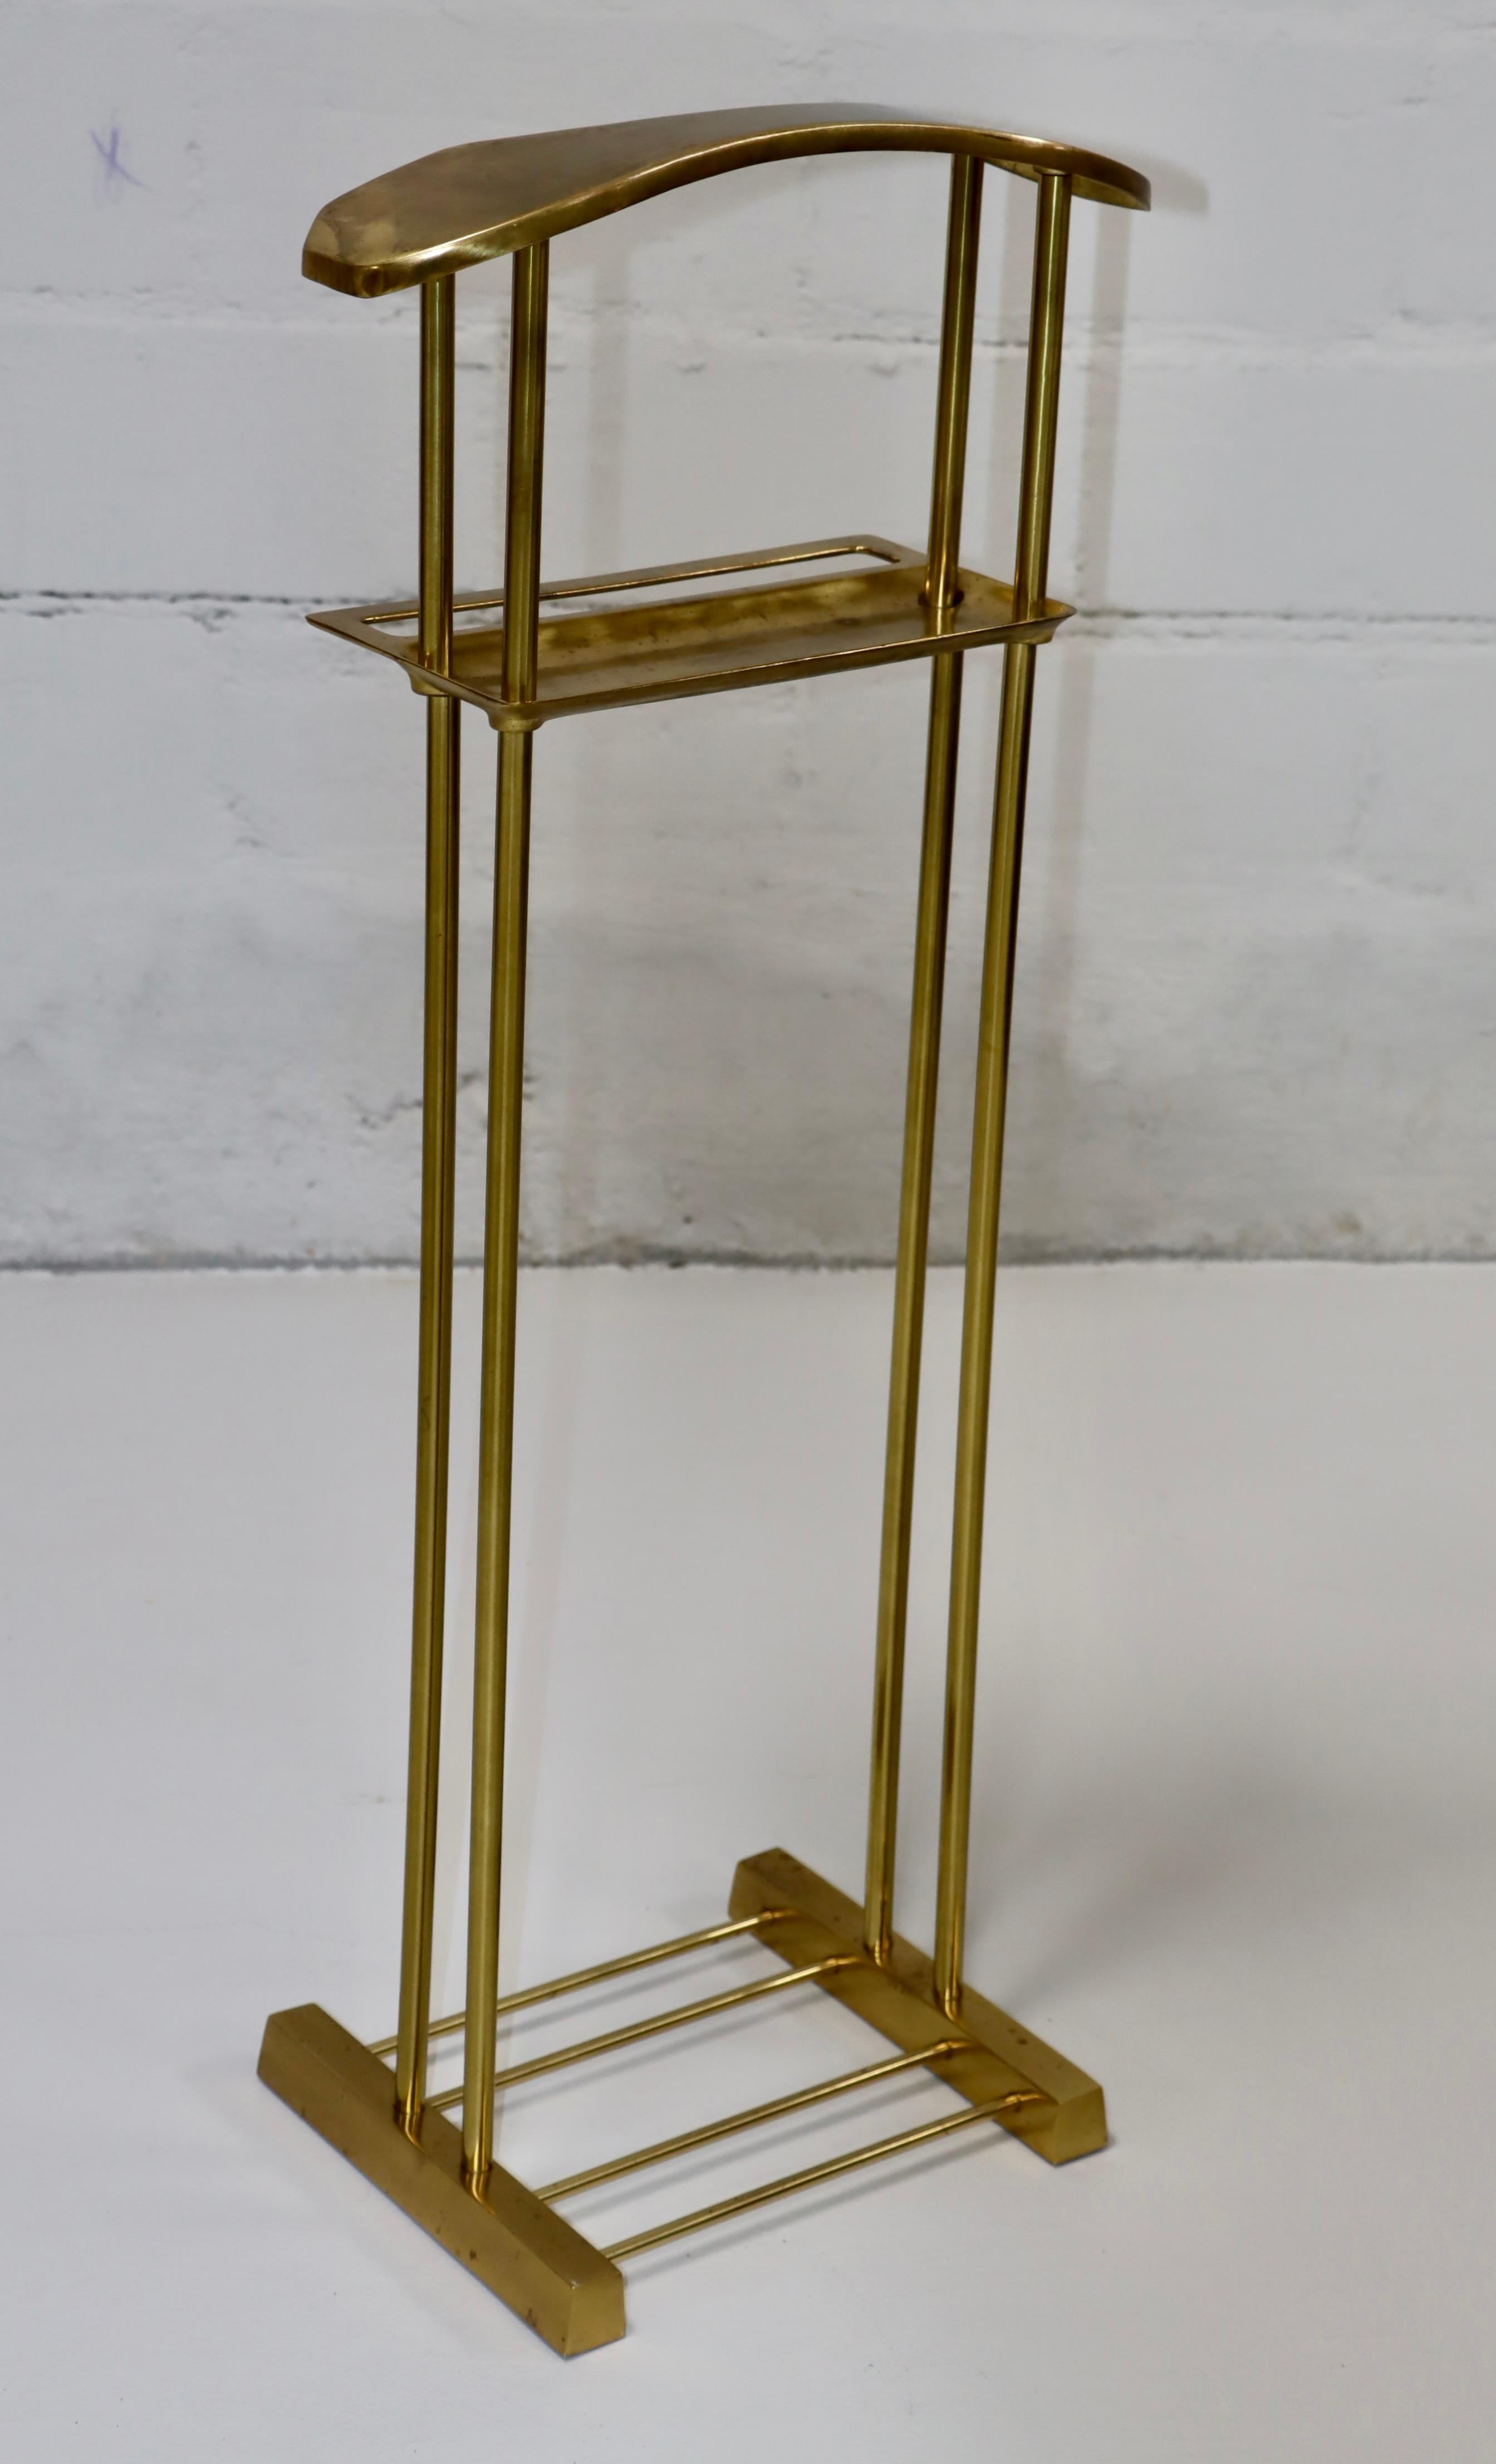 1980's Modernist Brass Valet Stand By Decorative Crafts Inc. For Sale 2